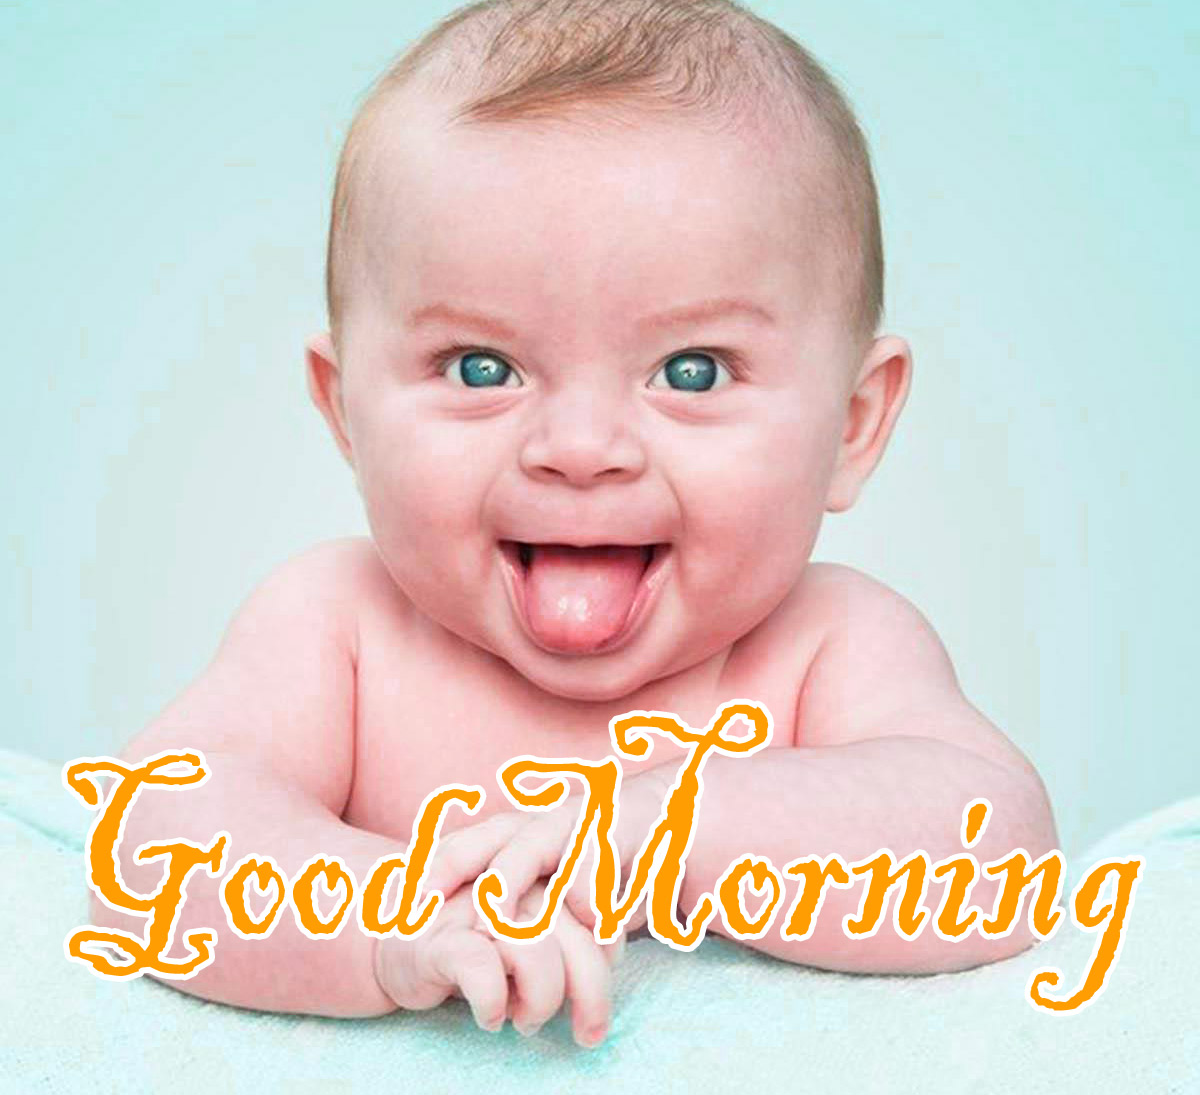 456+ Funny Good Morning Wishes Images Pictures Download HD